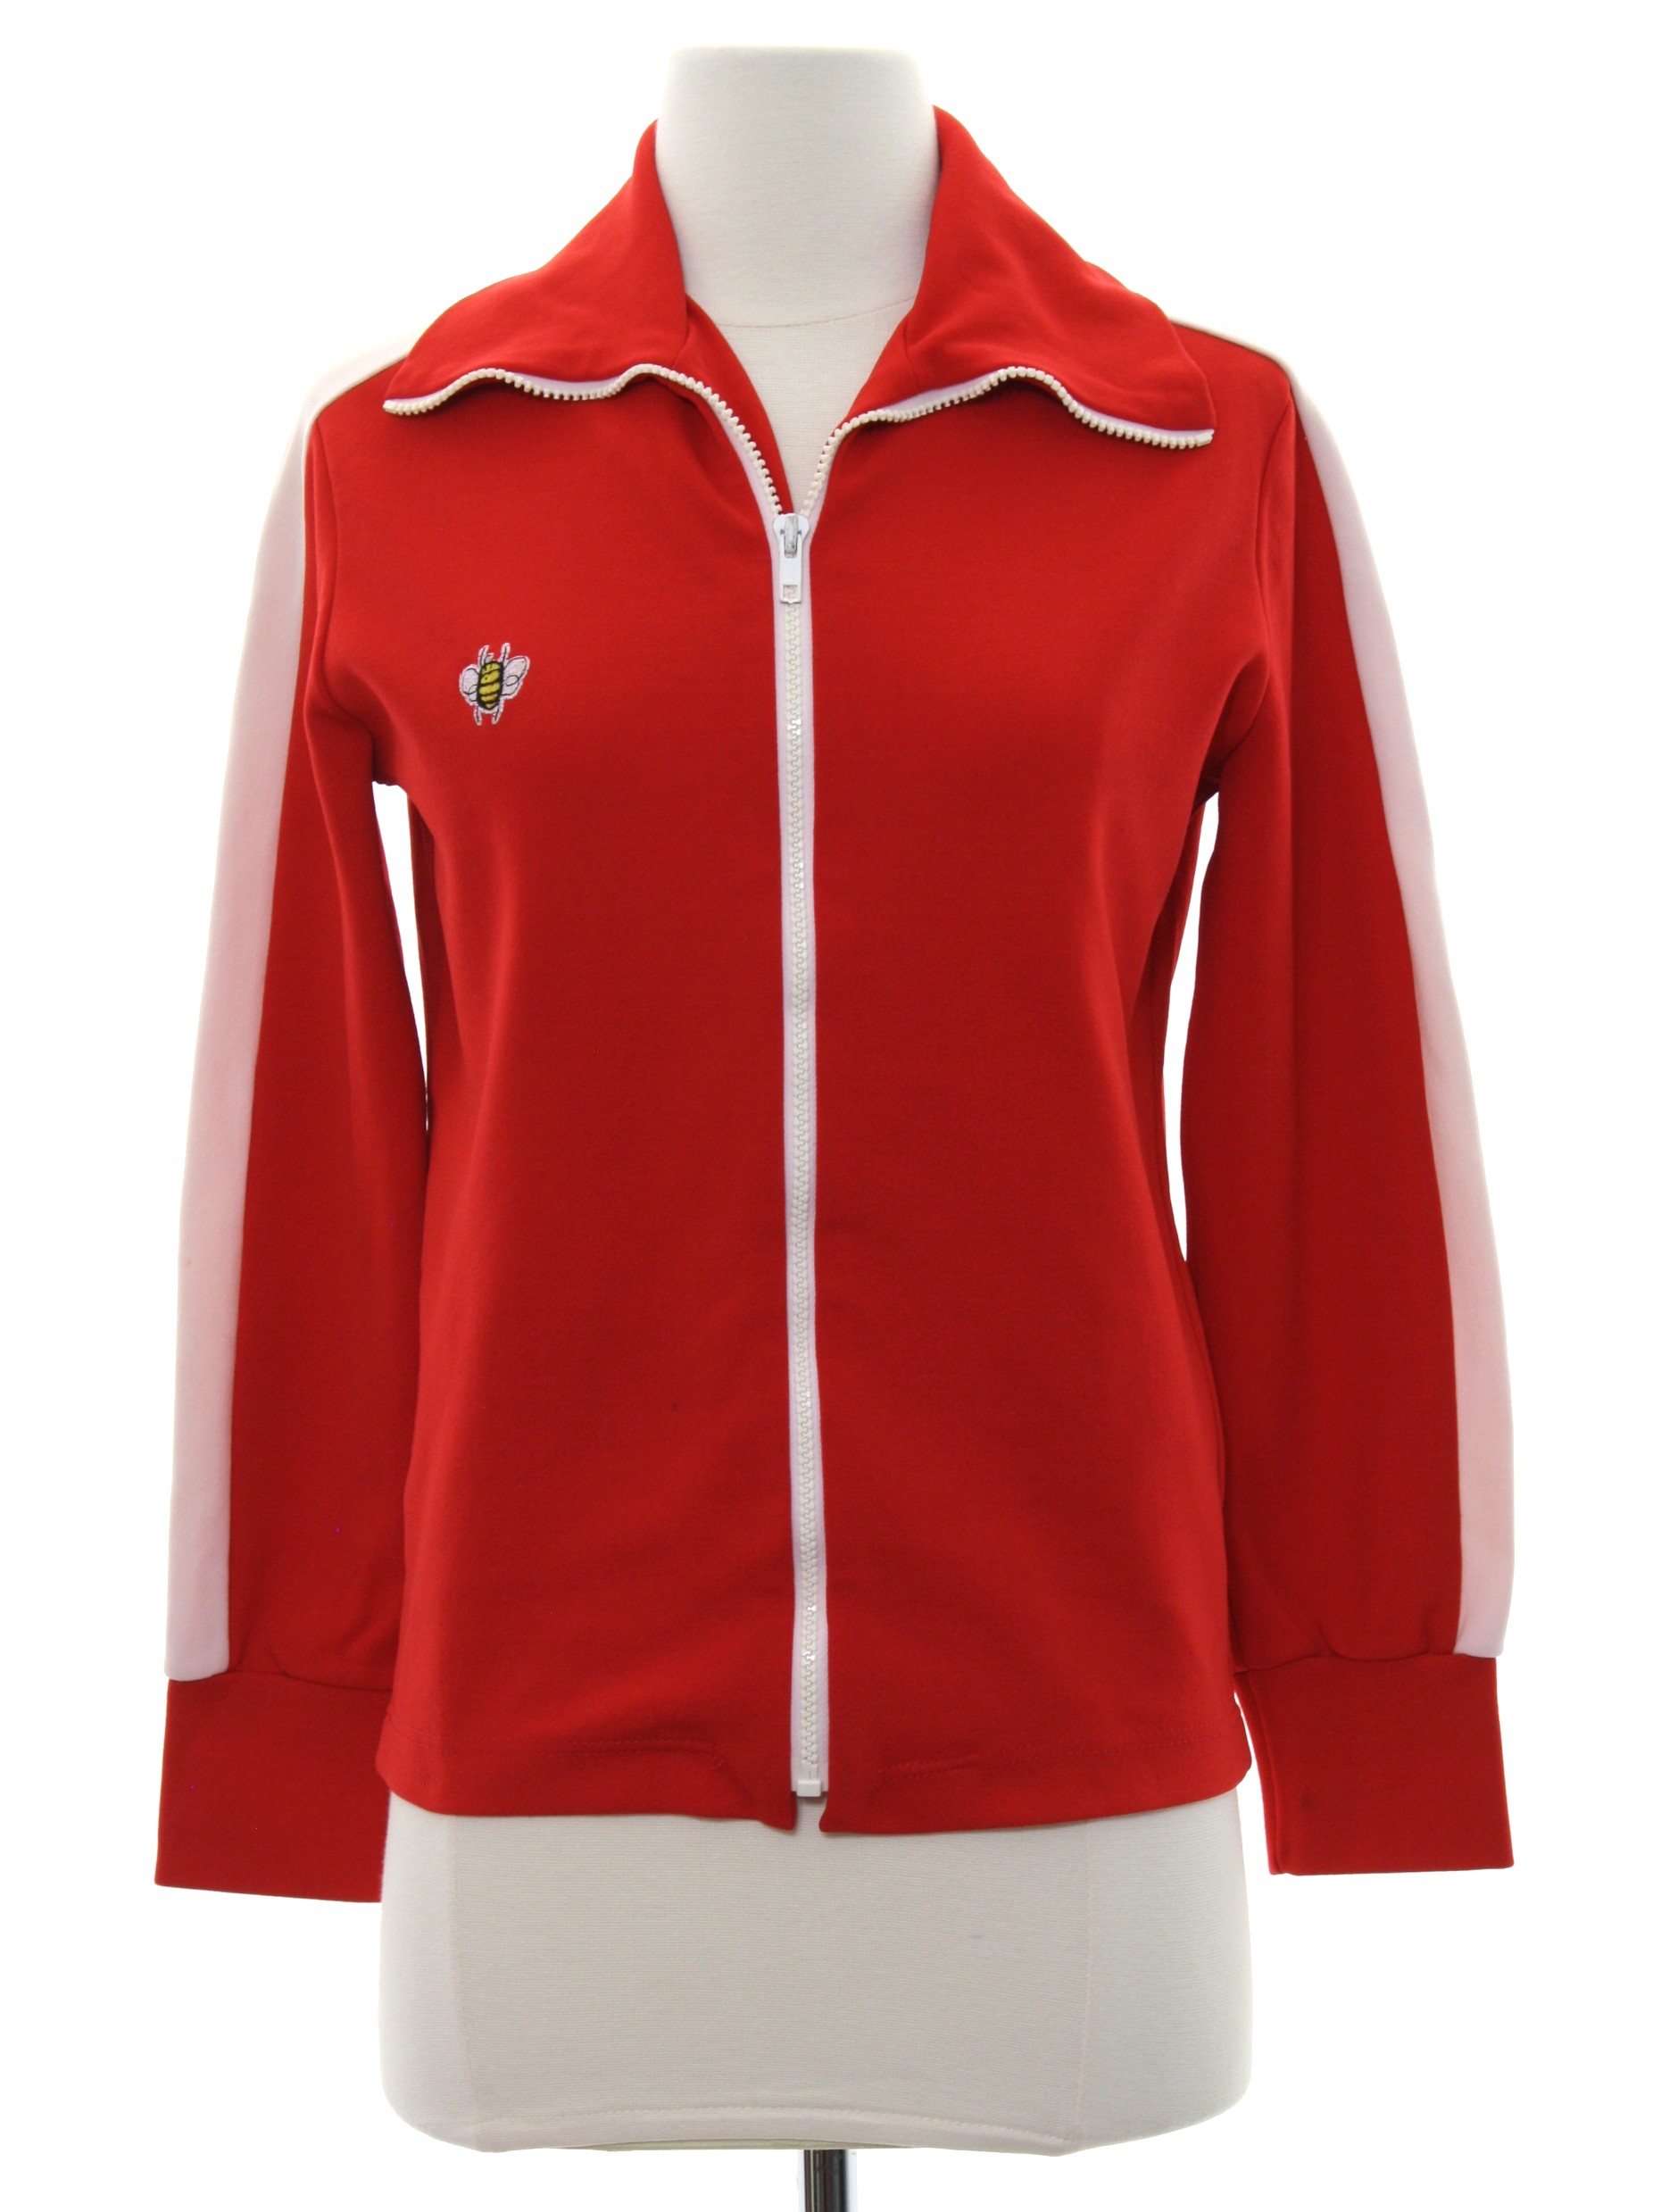 sleeves, Womens Label embroidered front on chest 70\'s Stripes No white nylon the 70s down design the bee and right Vintage Label- red longsleeve or an jacket. jogging zip -No Jacket: track